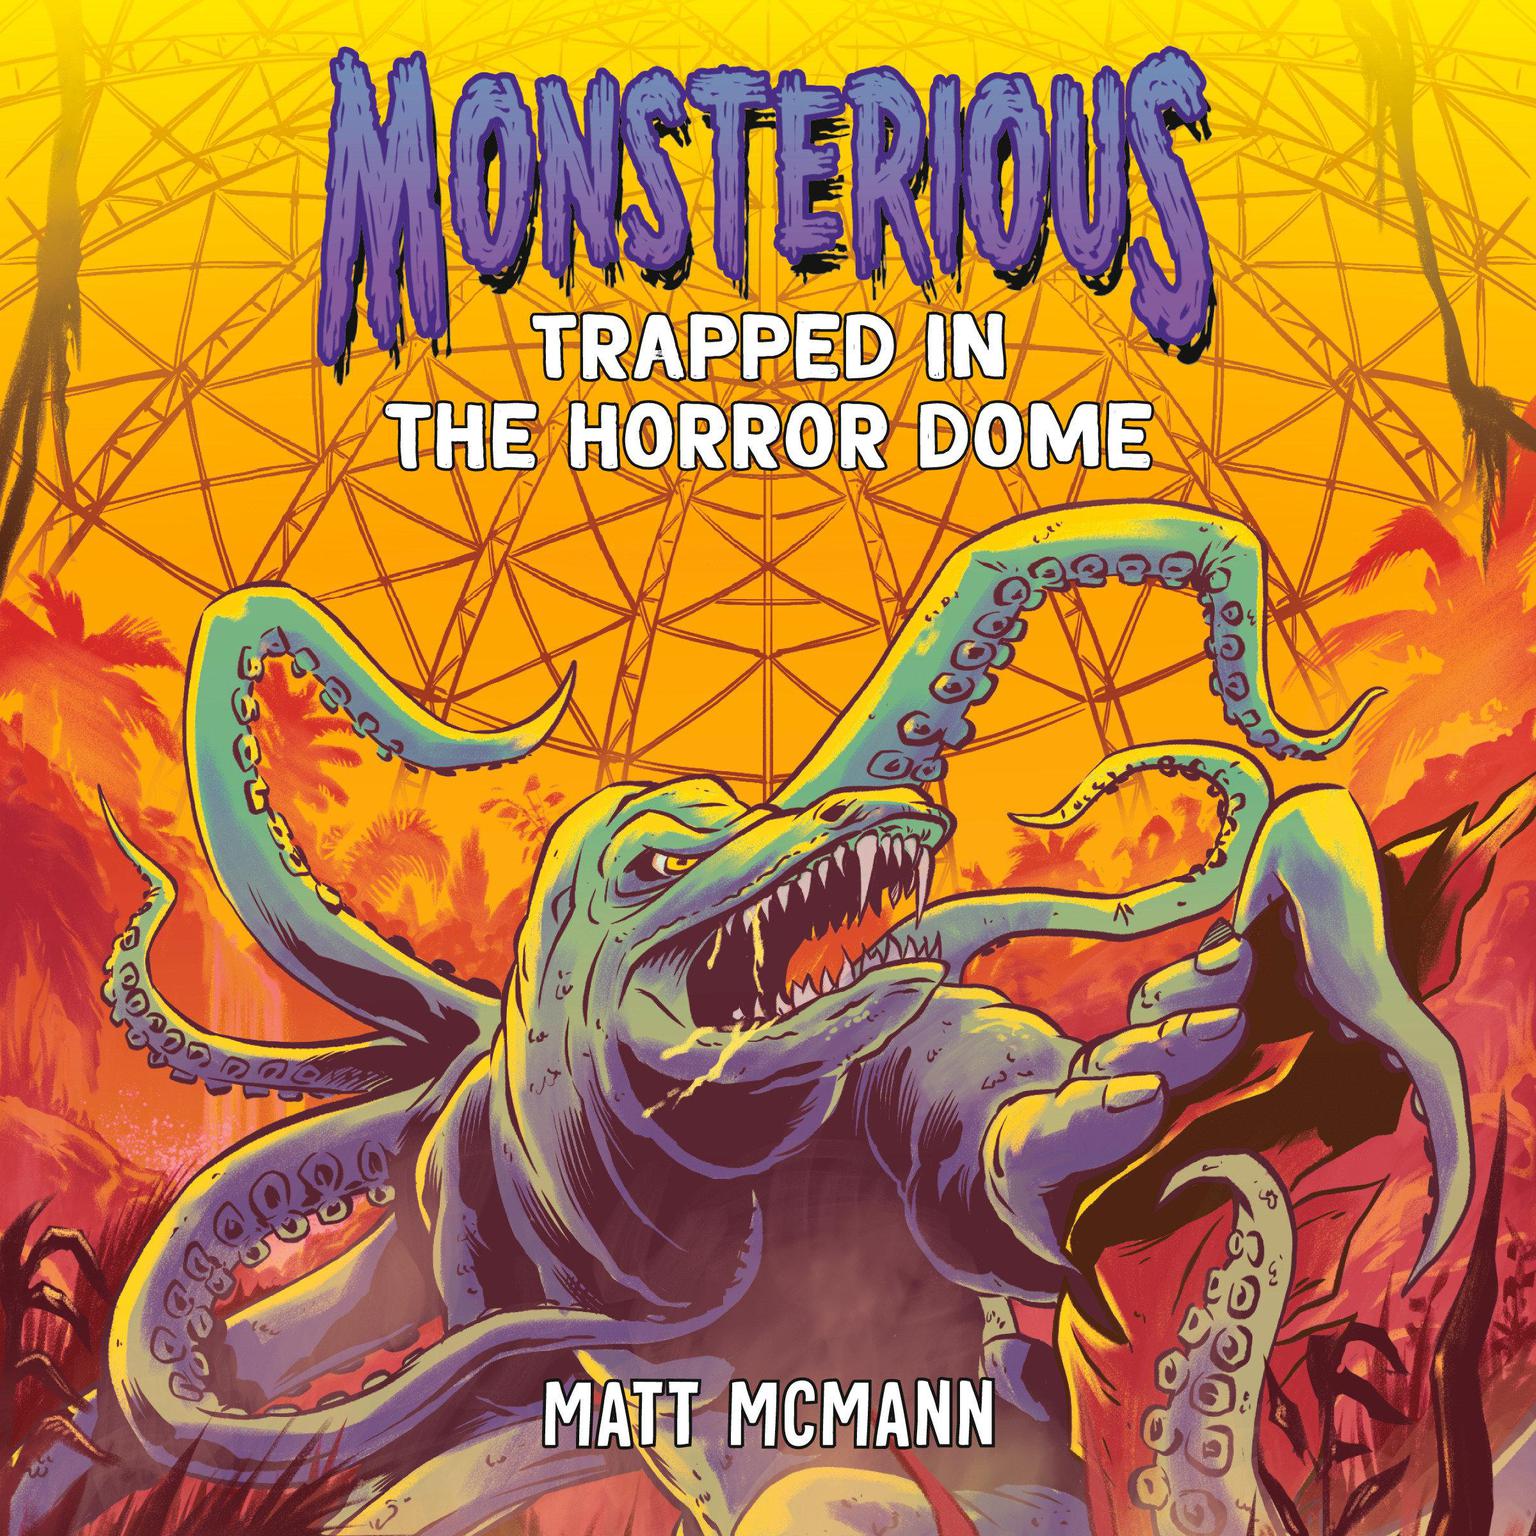 Trapped in the Horror Dome (Monsterious, Book 5) Audiobook, by Matt McMann